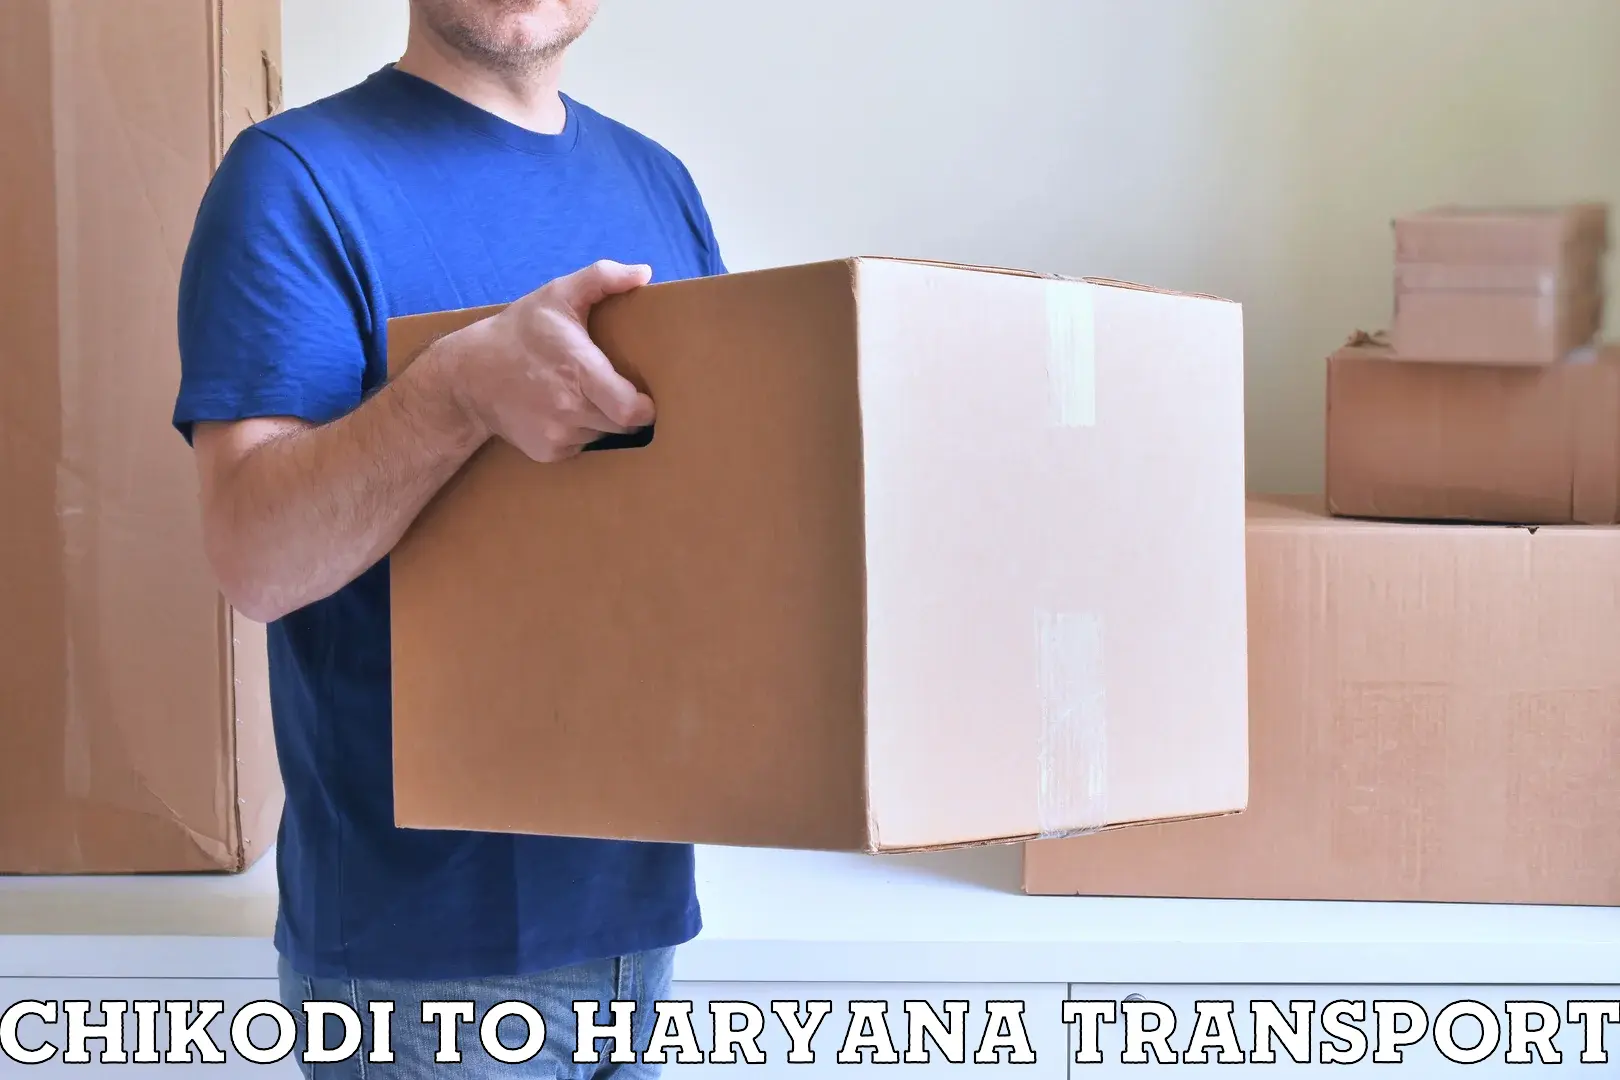 Shipping services in Chikodi to NCR Haryana